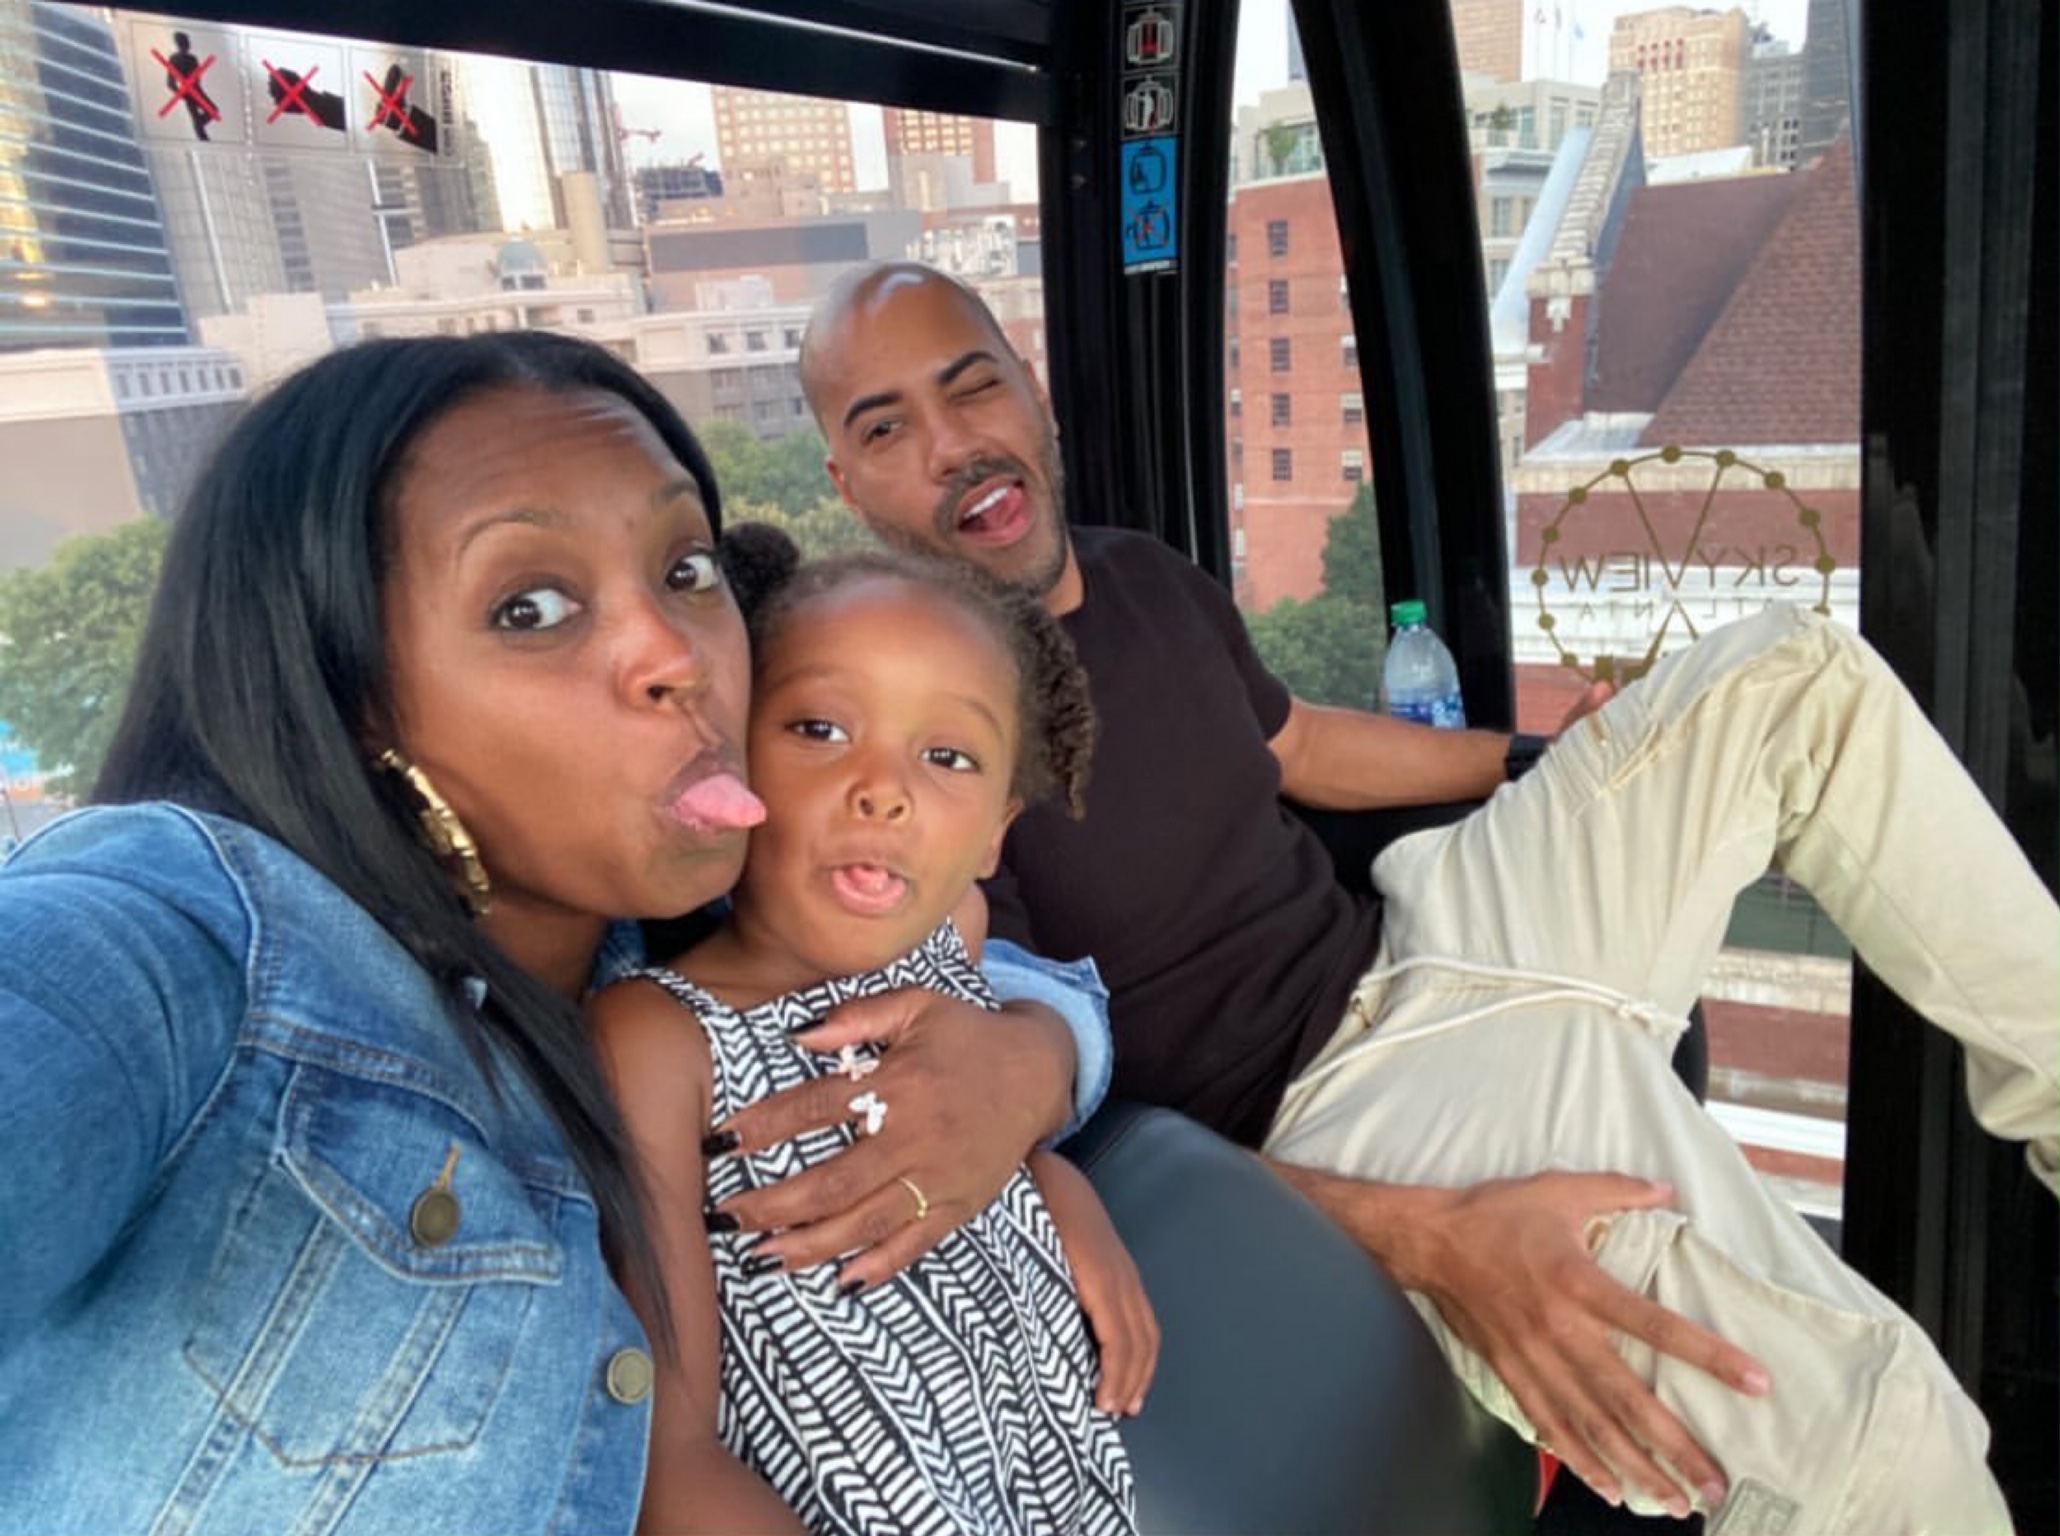 Keshia Knight Pulliam’s Daughter Is a Little Rudy! According to Fans